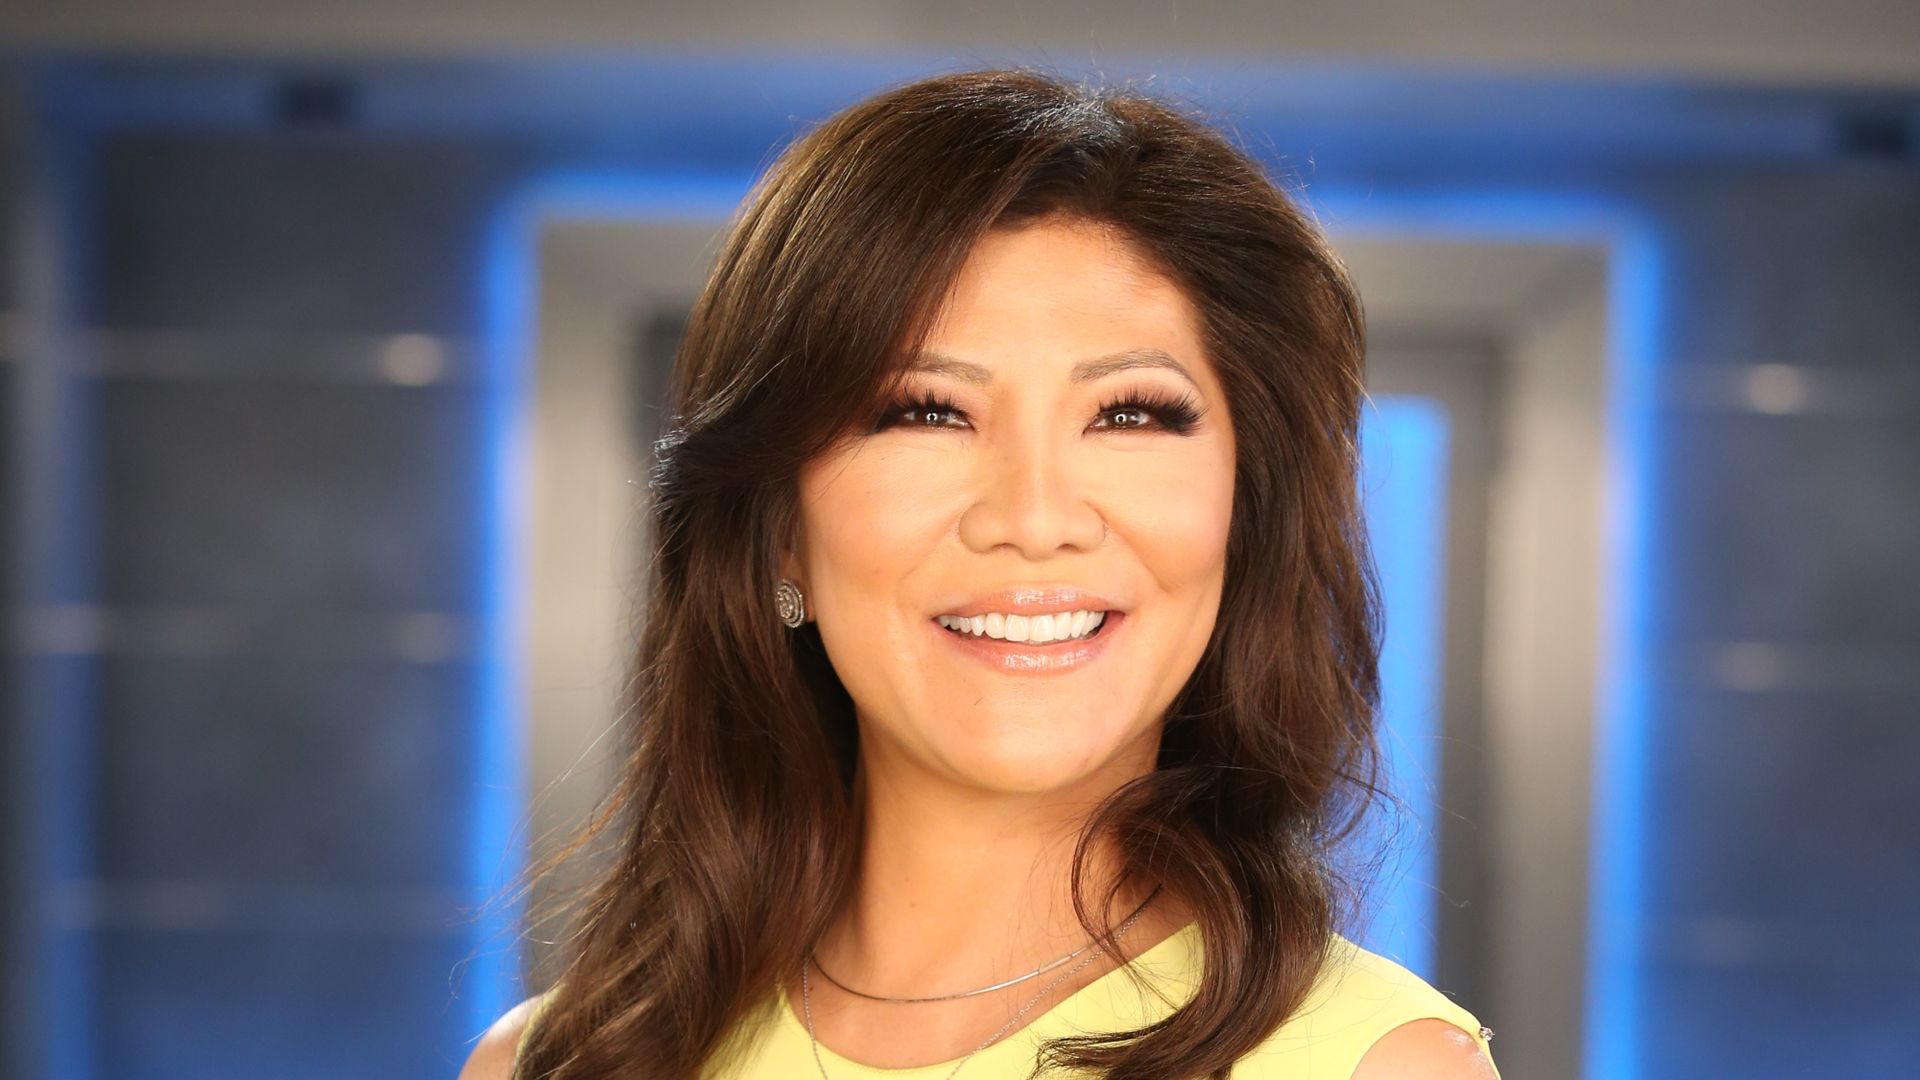 Julie Chen-Moonves, host of BIG BROTHER 21, BIG BROTHER's two-night premiere event airing Tuesday, June 25 and Wednesday, June 26 (8:00 Ã 9:00 PM, ET/PT), on the CBS Television Network.  Following the two-night premiere, BIG BROTHER will be broadcast Sunday, June 30 (8:00-9:00 PM, ET/PT) and Tuesday, July 2 (8:00-9:00 PM, ET/PT). The first live eviction airs Wednesday, July 3. As of Wednesday, July 10, the show moves to its regular schedule of Wednesdays (9:00-10:00 PM, ET/PT), Thursdays, featuring the live evictions (9:00-10:00 PM, LIVE ET/Delayed PT) and scheduled to air on the CBS Television Network